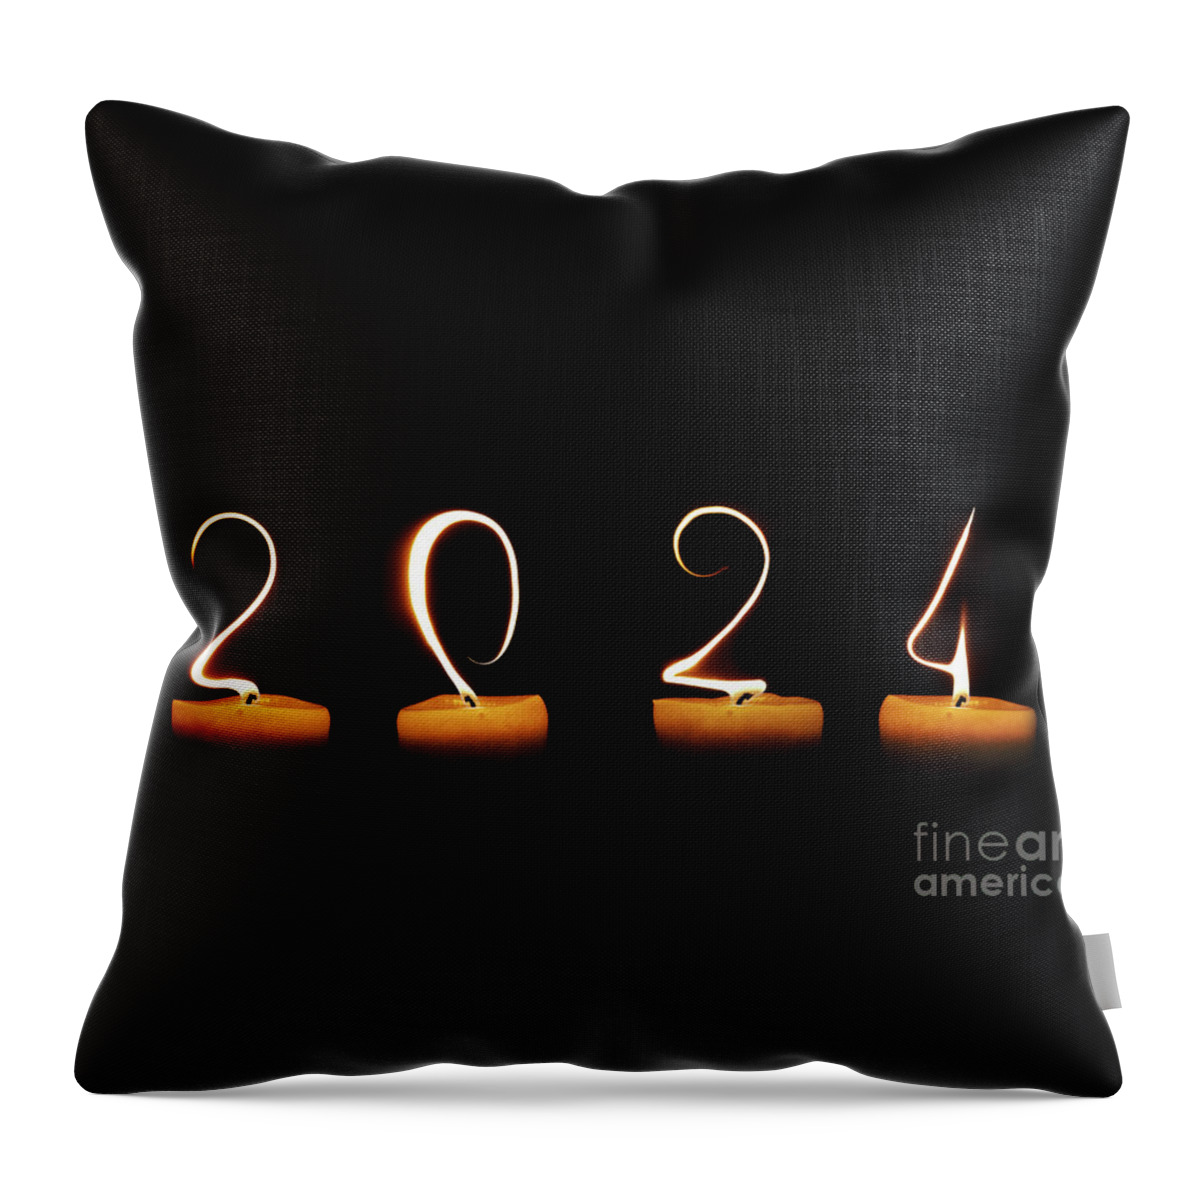 New Year Throw Pillow featuring the digital art Candles new year card by Delphimages Photo Creations